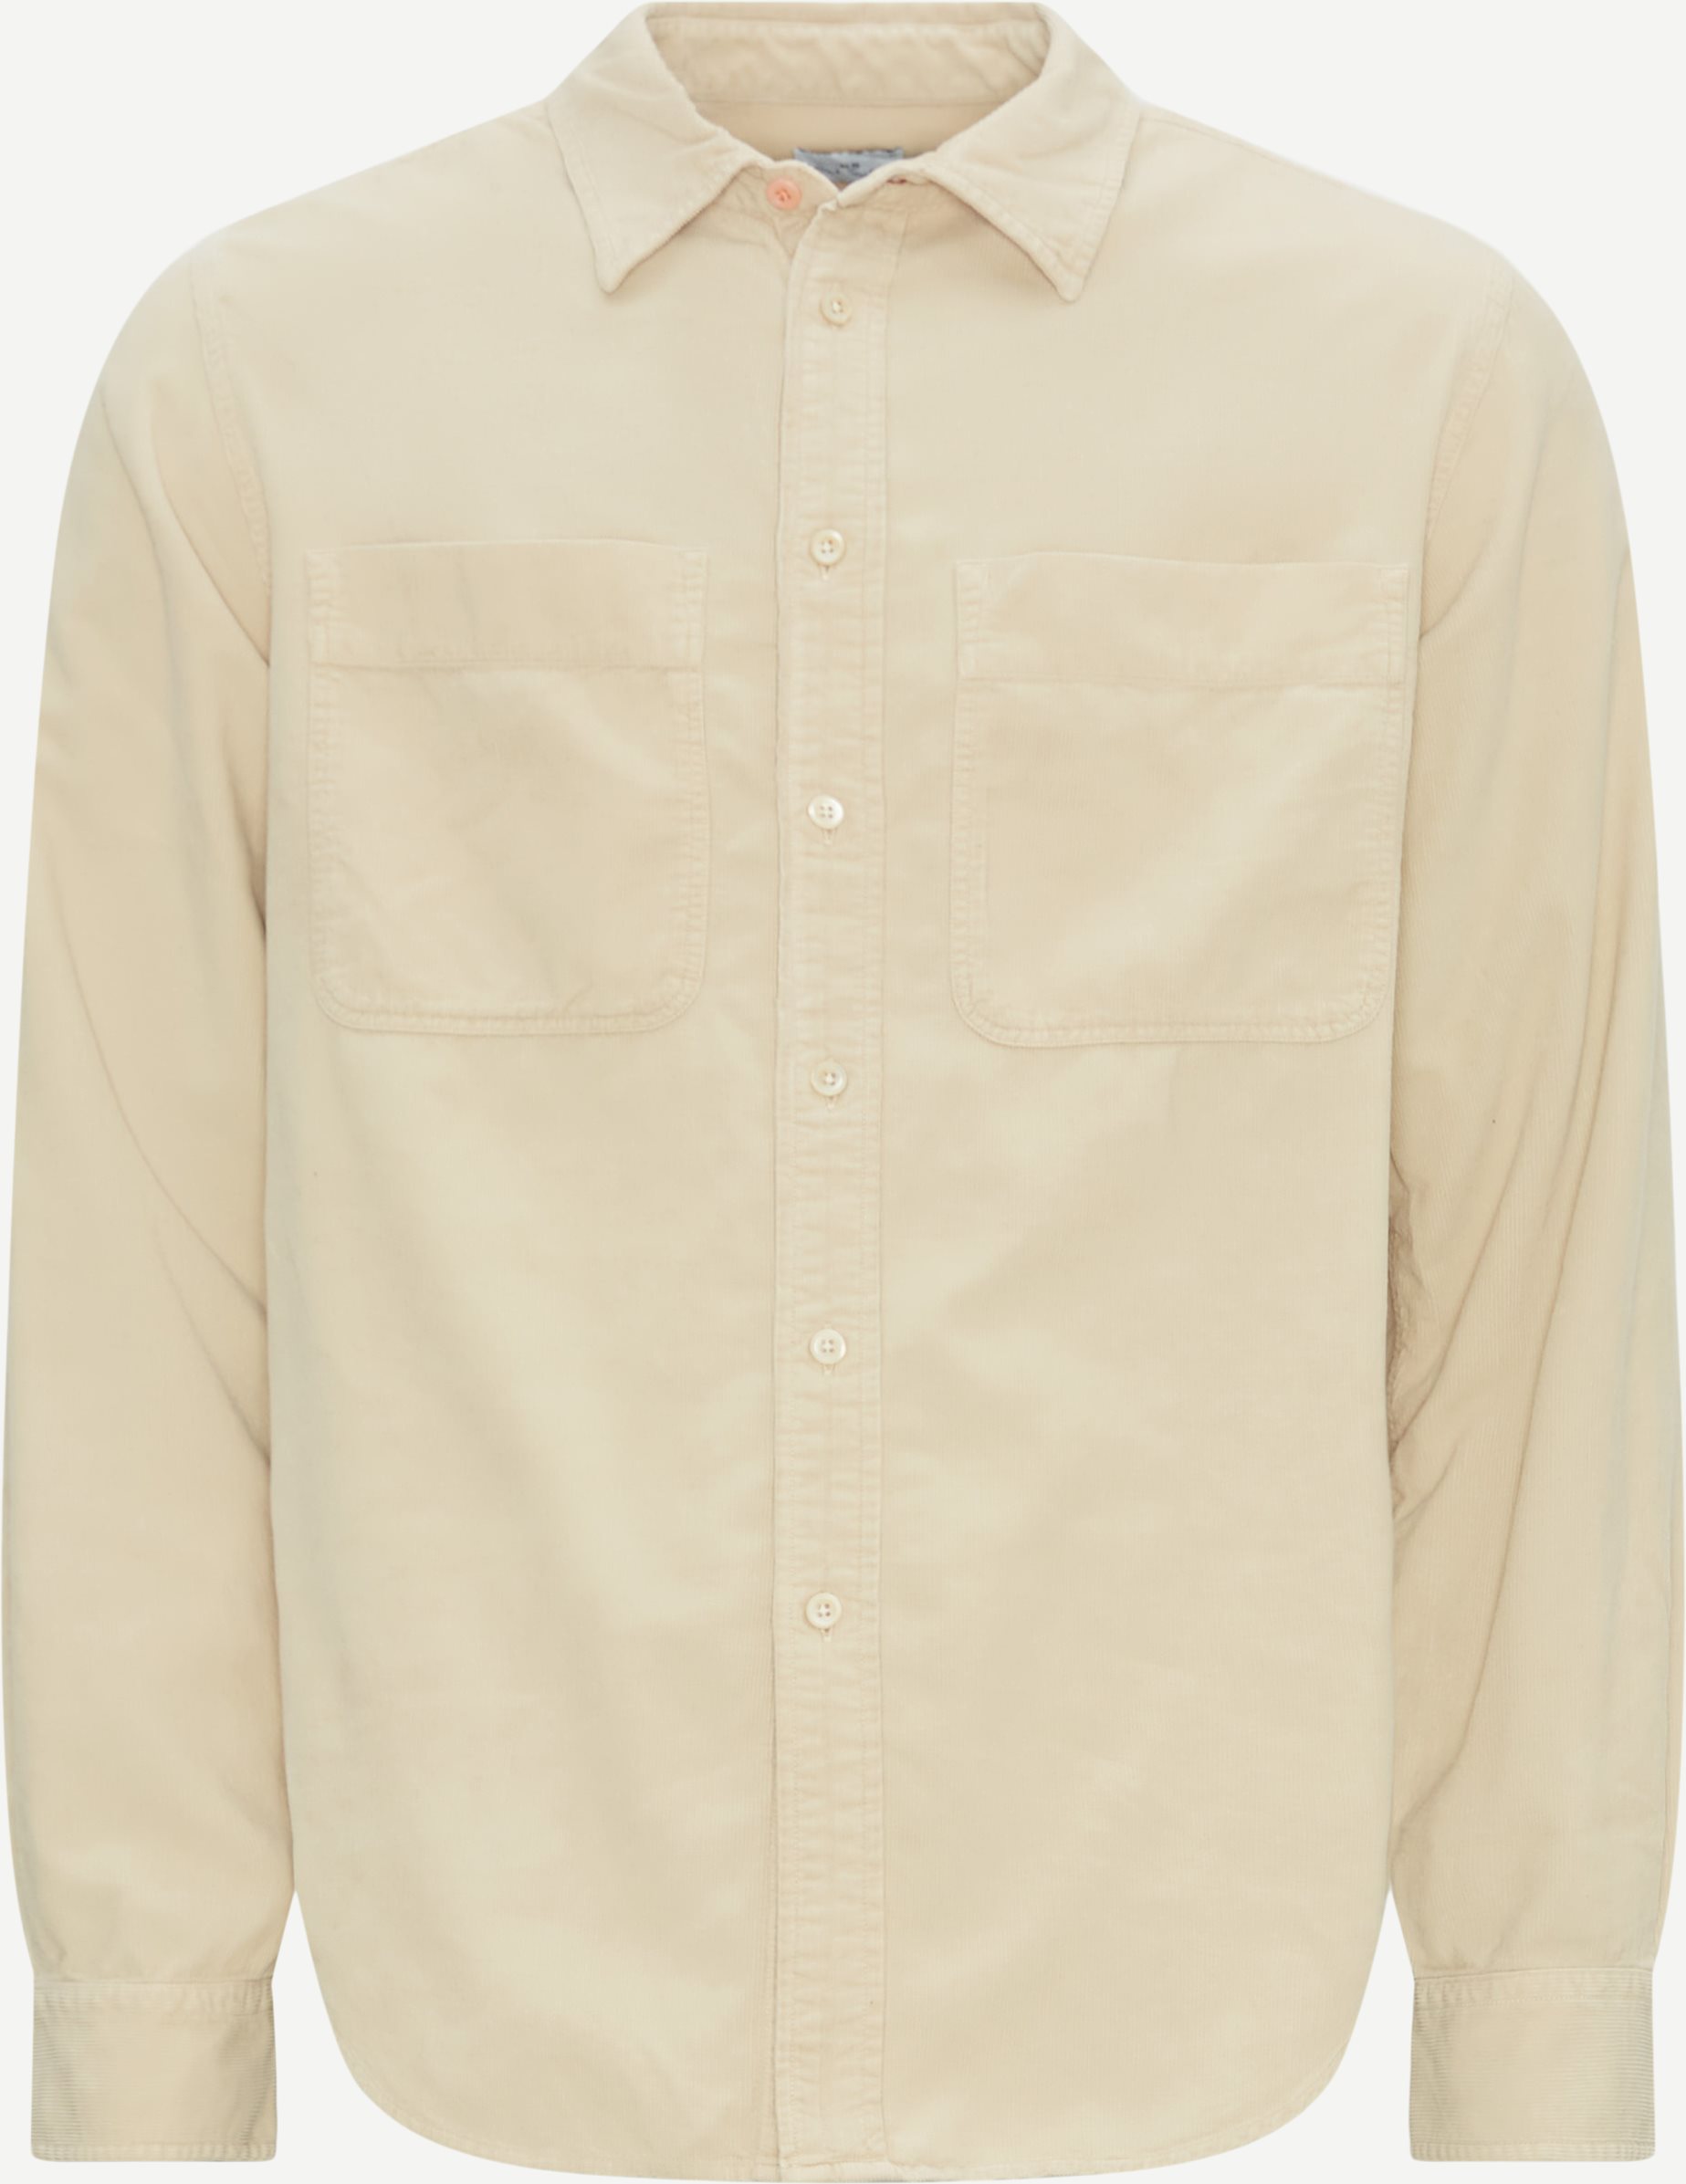 PS Paul Smith Skjorter 450Y-L21879 MENS LS CASUAL FIT SHIRT Sand